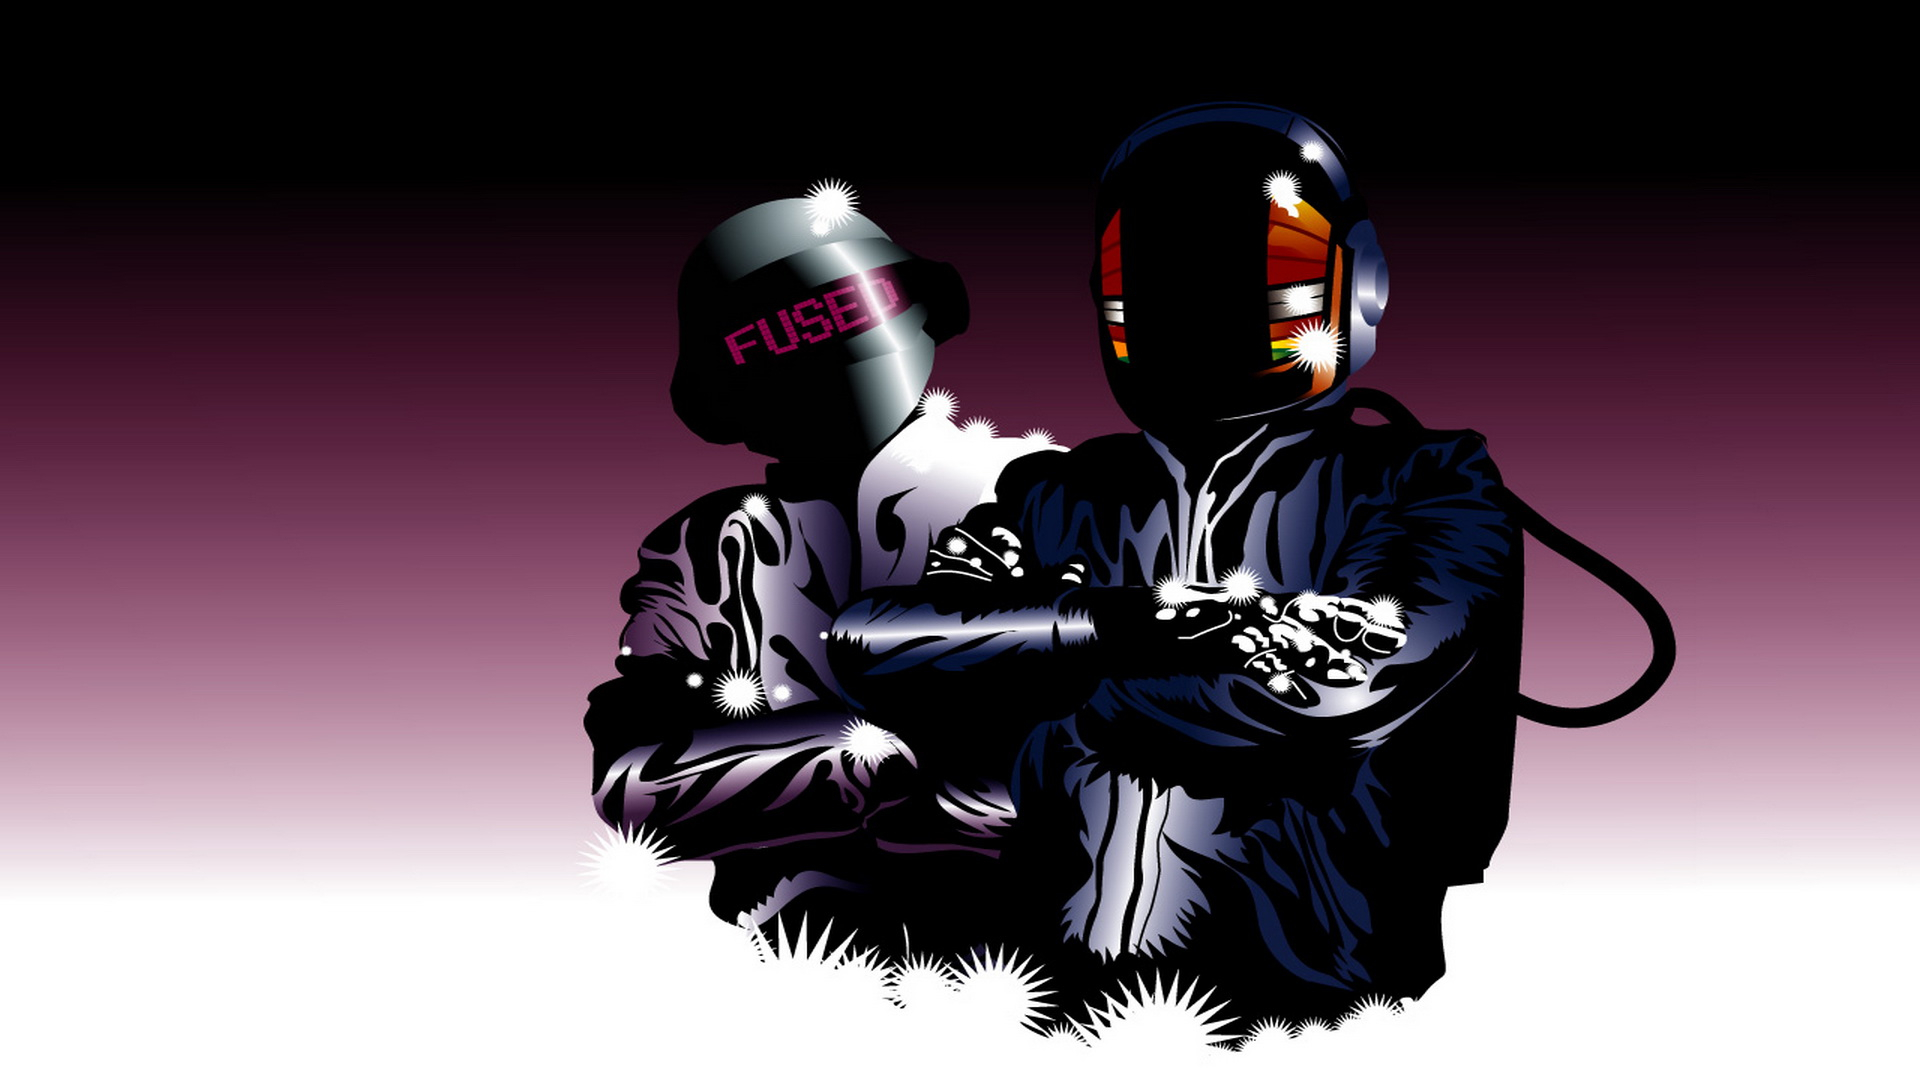 1920x1080 220+ Daft Punk HD Wallpapers and Backgrounds